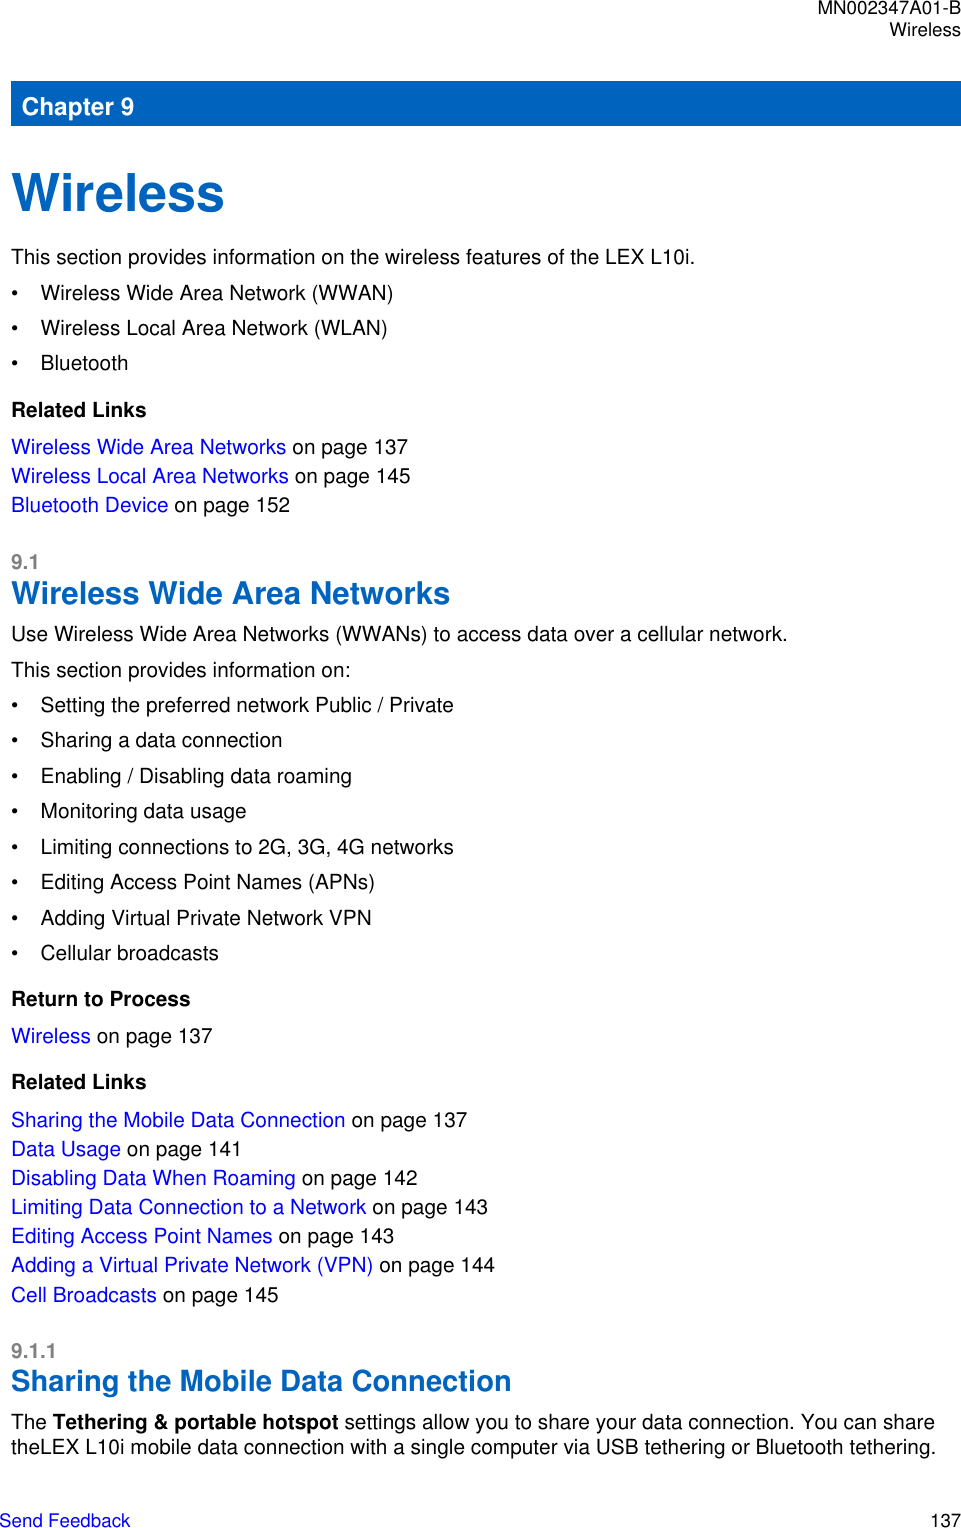 Chapter 9WirelessThis section provides information on the wireless features of the LEX L10i.• Wireless Wide Area Network (WWAN)• Wireless Local Area Network (WLAN)• BluetoothRelated LinksWireless Wide Area Networks on page 137Wireless Local Area Networks on page 145Bluetooth Device on page 1529.1Wireless Wide Area NetworksUse Wireless Wide Area Networks (WWANs) to access data over a cellular network.This section provides information on:• Setting the preferred network Public / Private• Sharing a data connection• Enabling / Disabling data roaming• Monitoring data usage• Limiting connections to 2G, 3G, 4G networks• Editing Access Point Names (APNs)• Adding Virtual Private Network VPN• Cellular broadcastsReturn to ProcessWireless on page 137Related LinksSharing the Mobile Data Connection on page 137Data Usage on page 141Disabling Data When Roaming on page 142Limiting Data Connection to a Network on page 143Editing Access Point Names on page 143Adding a Virtual Private Network (VPN) on page 144Cell Broadcasts on page 1459.1.1Sharing the Mobile Data ConnectionThe Tethering &amp; portable hotspot settings allow you to share your data connection. You can sharetheLEX L10i mobile data connection with a single computer via USB tethering or Bluetooth tethering.MN002347A01-BWirelessSend Feedback   137